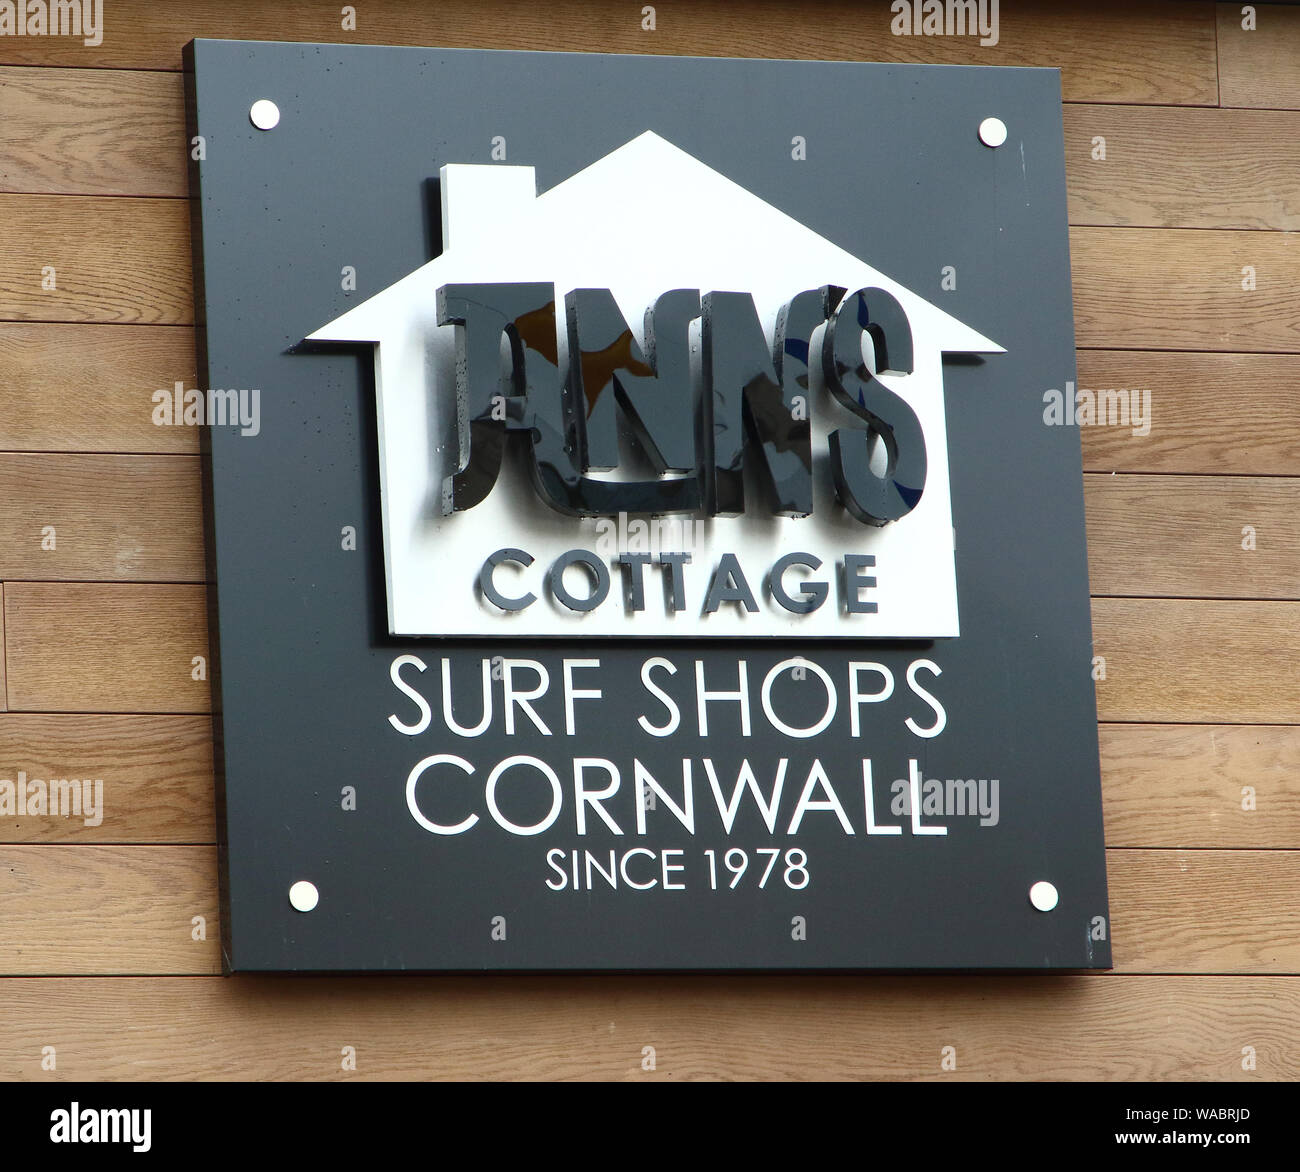 Truro Cornwall Uk 16th Aug 2019 Anns Cottage Surf Store In